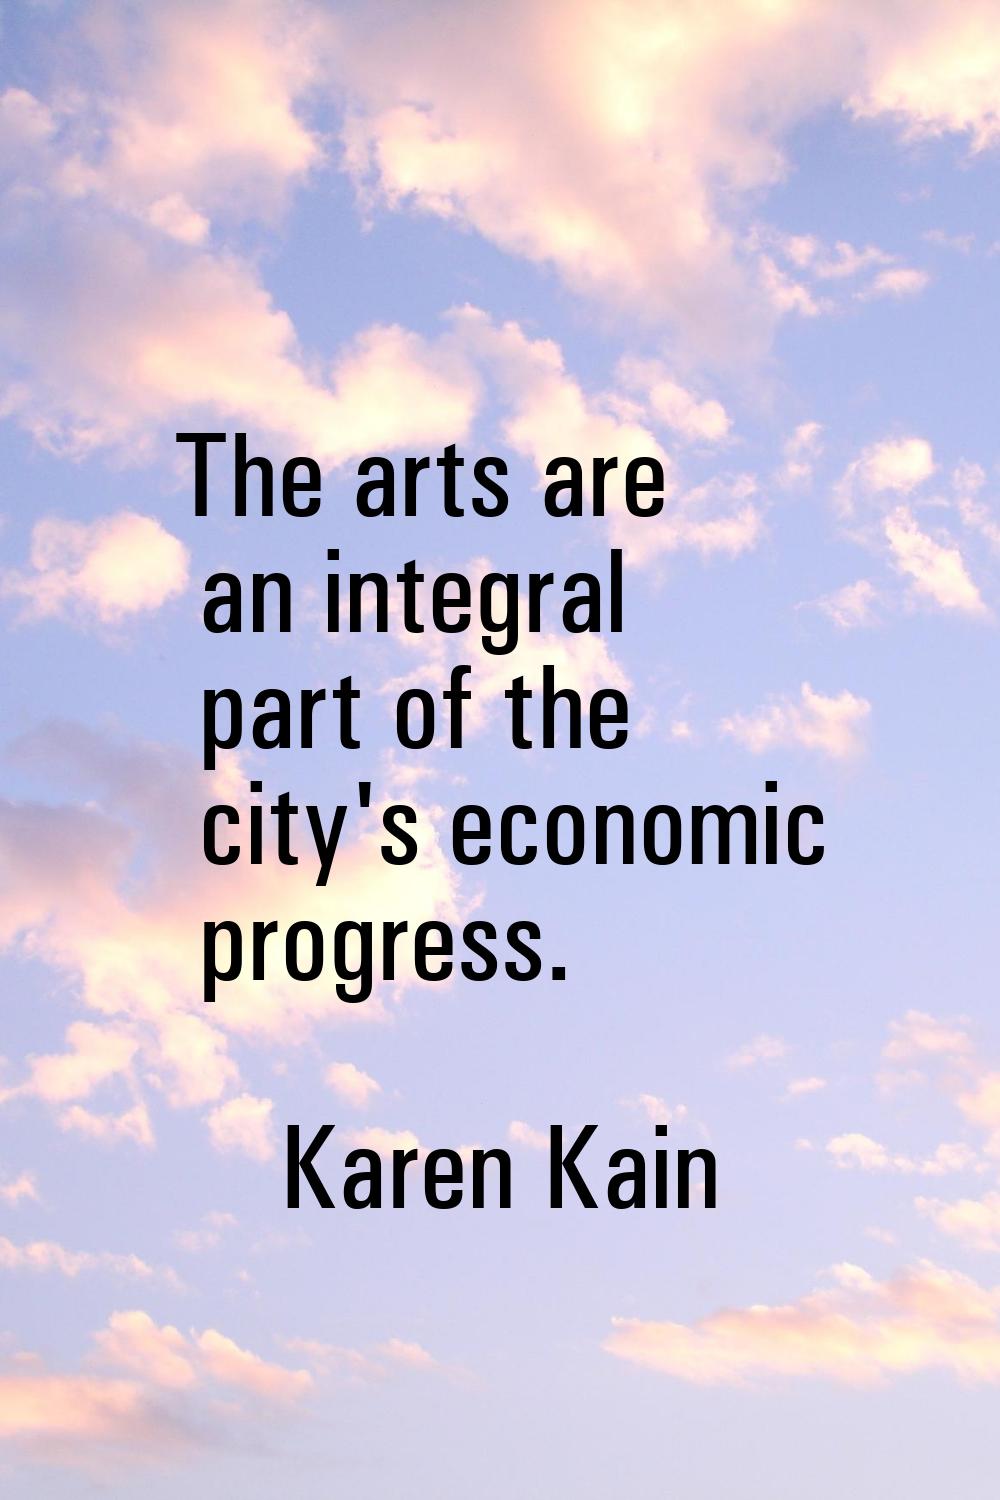 The arts are an integral part of the city's economic progress.